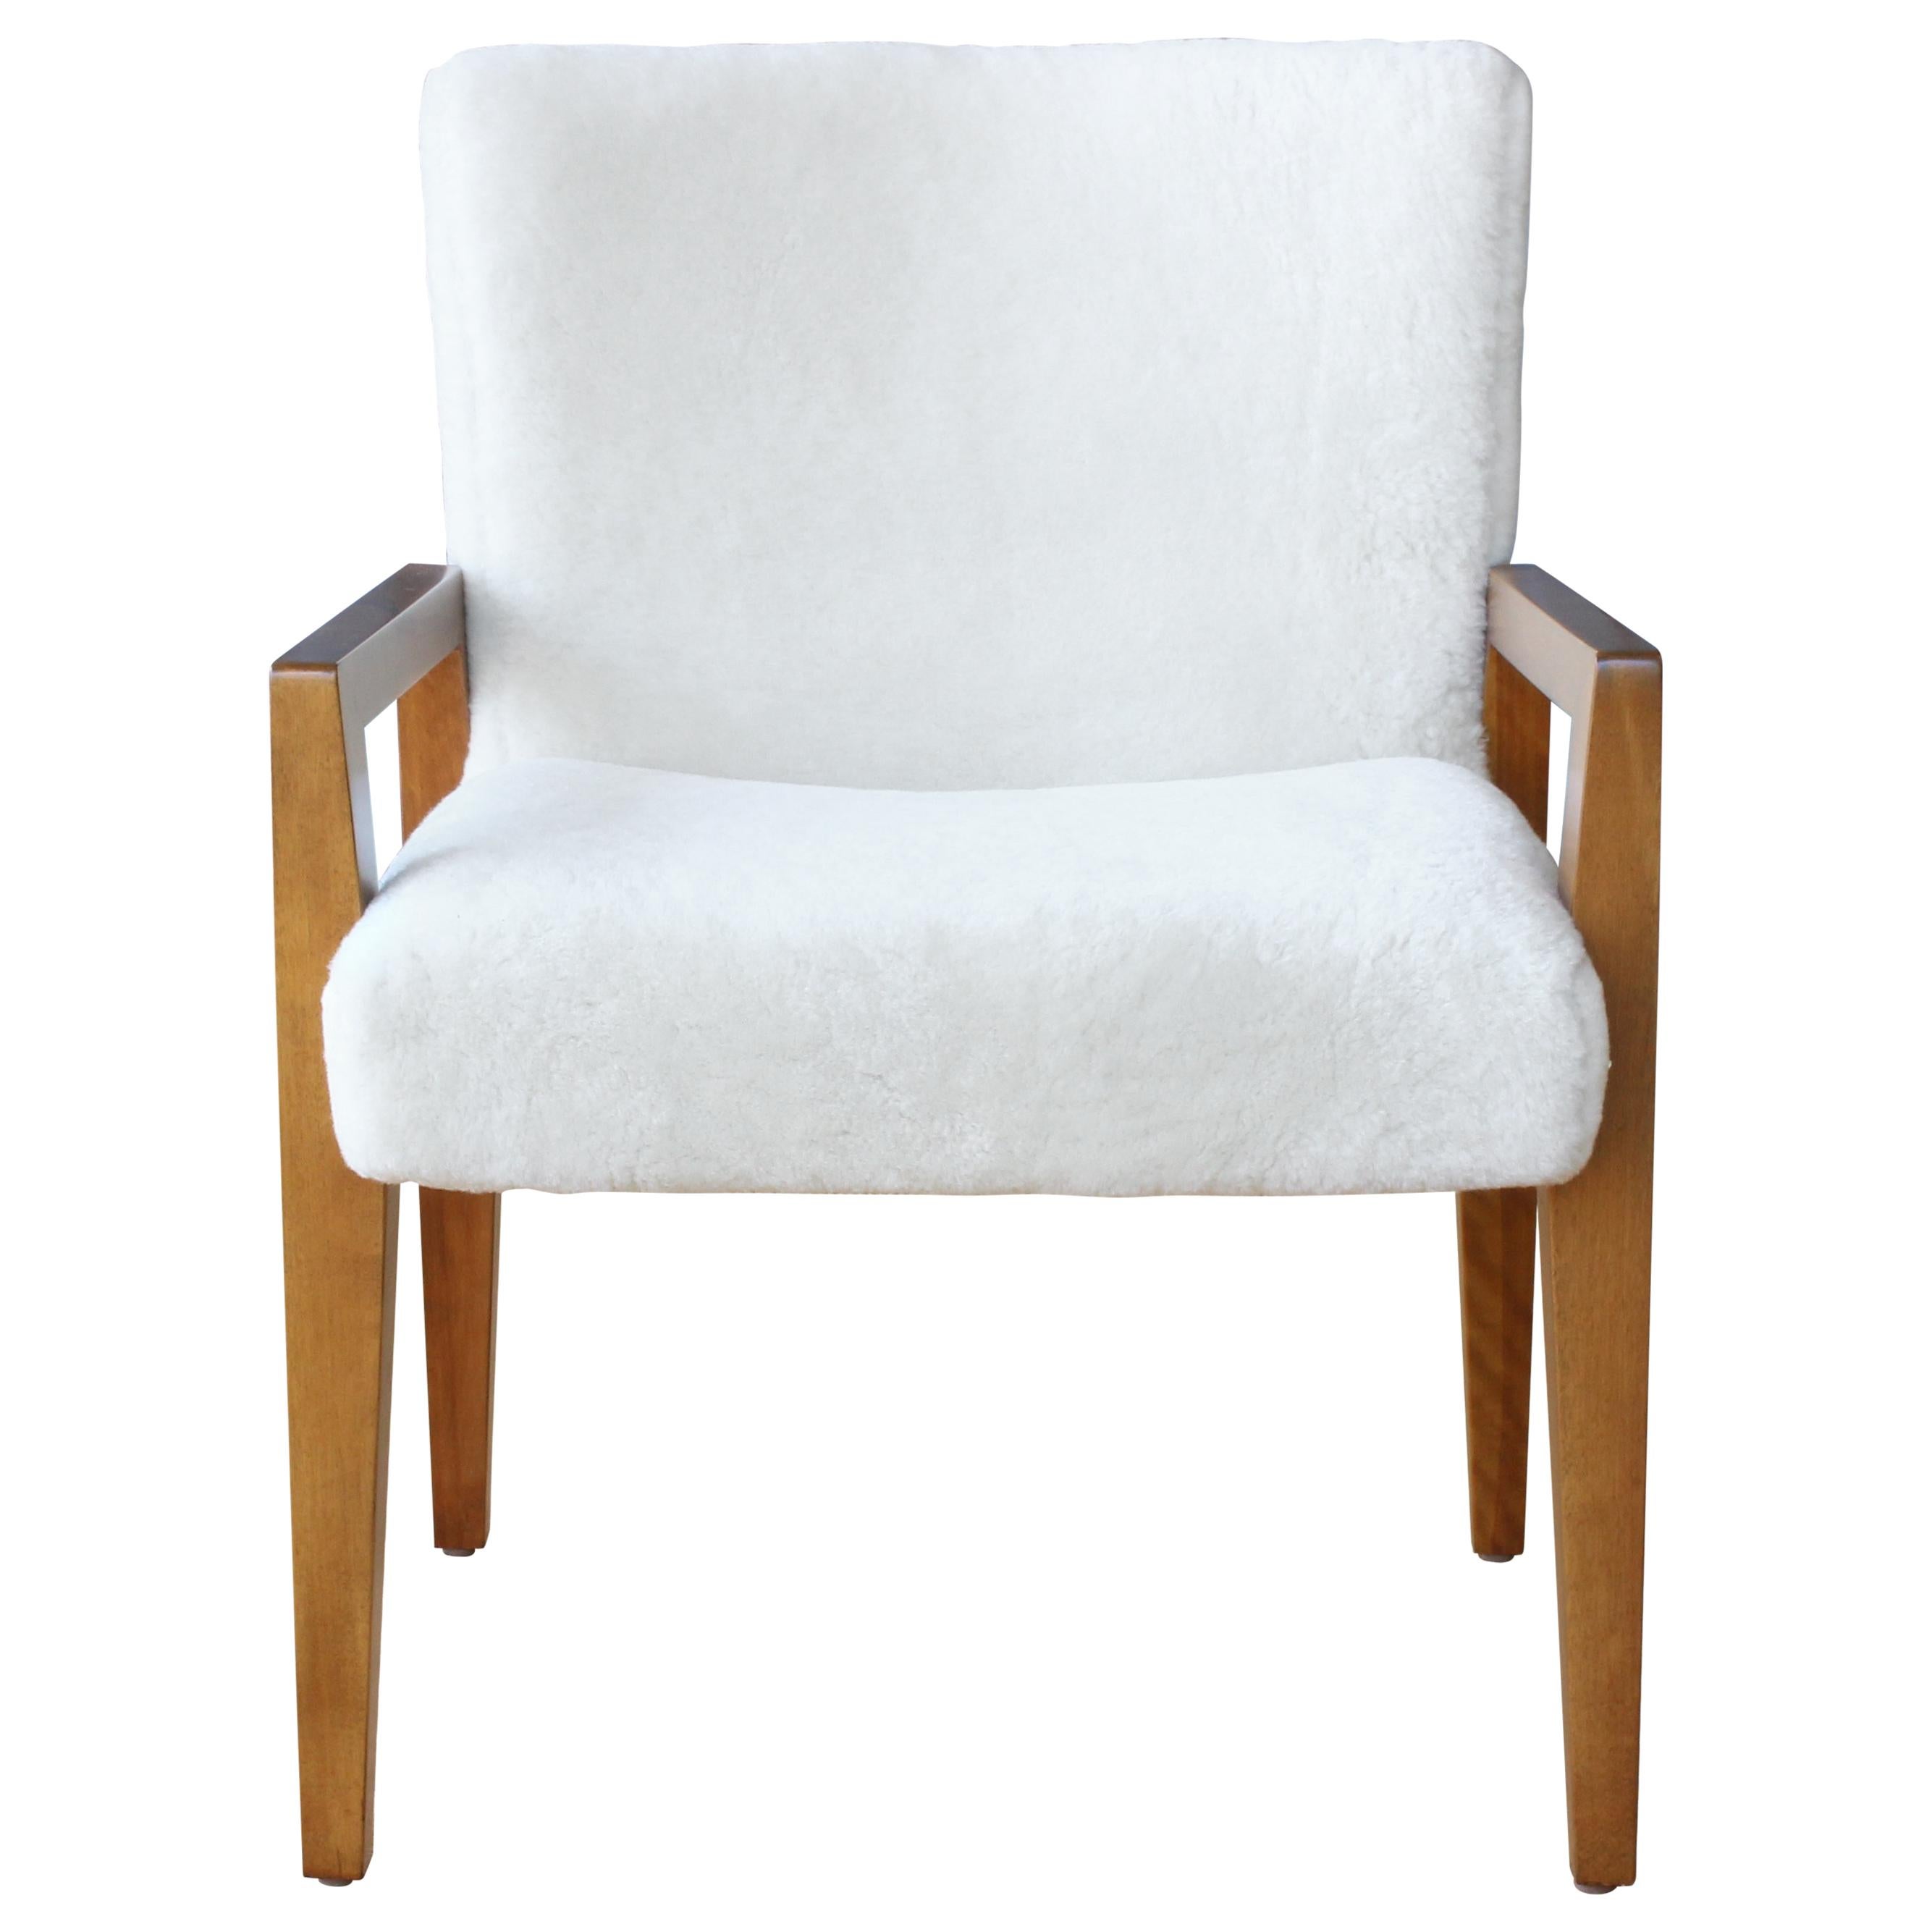 Midcentury Armchair in Shearling Upholstery, Italy, 1950s